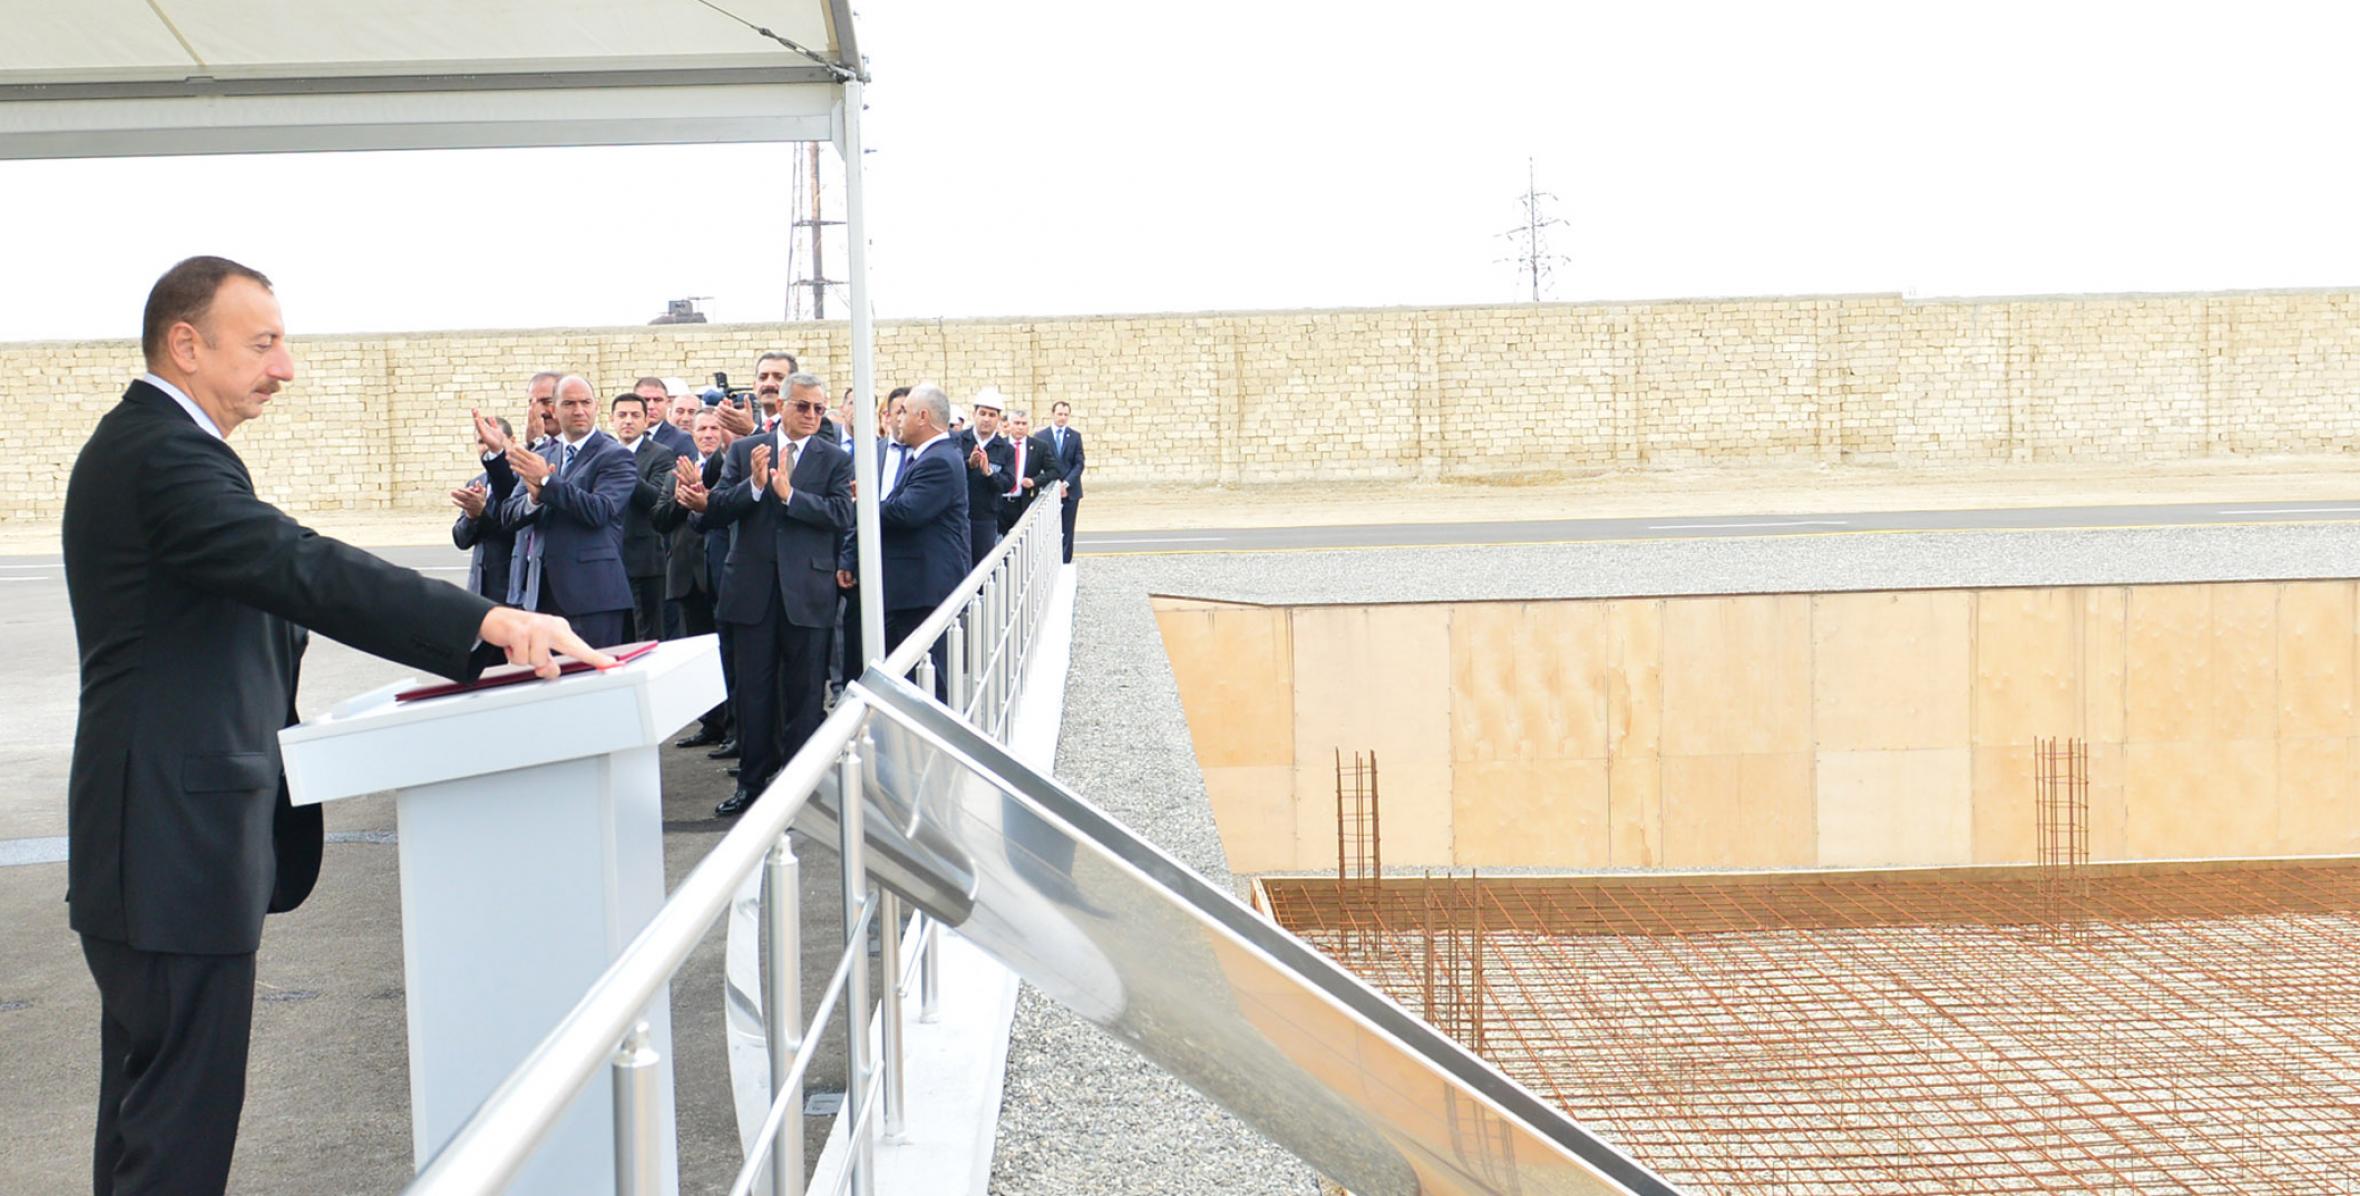 Ilham Aliyev attended the groundbreaking ceremony of the Sumgayit chemical industry park